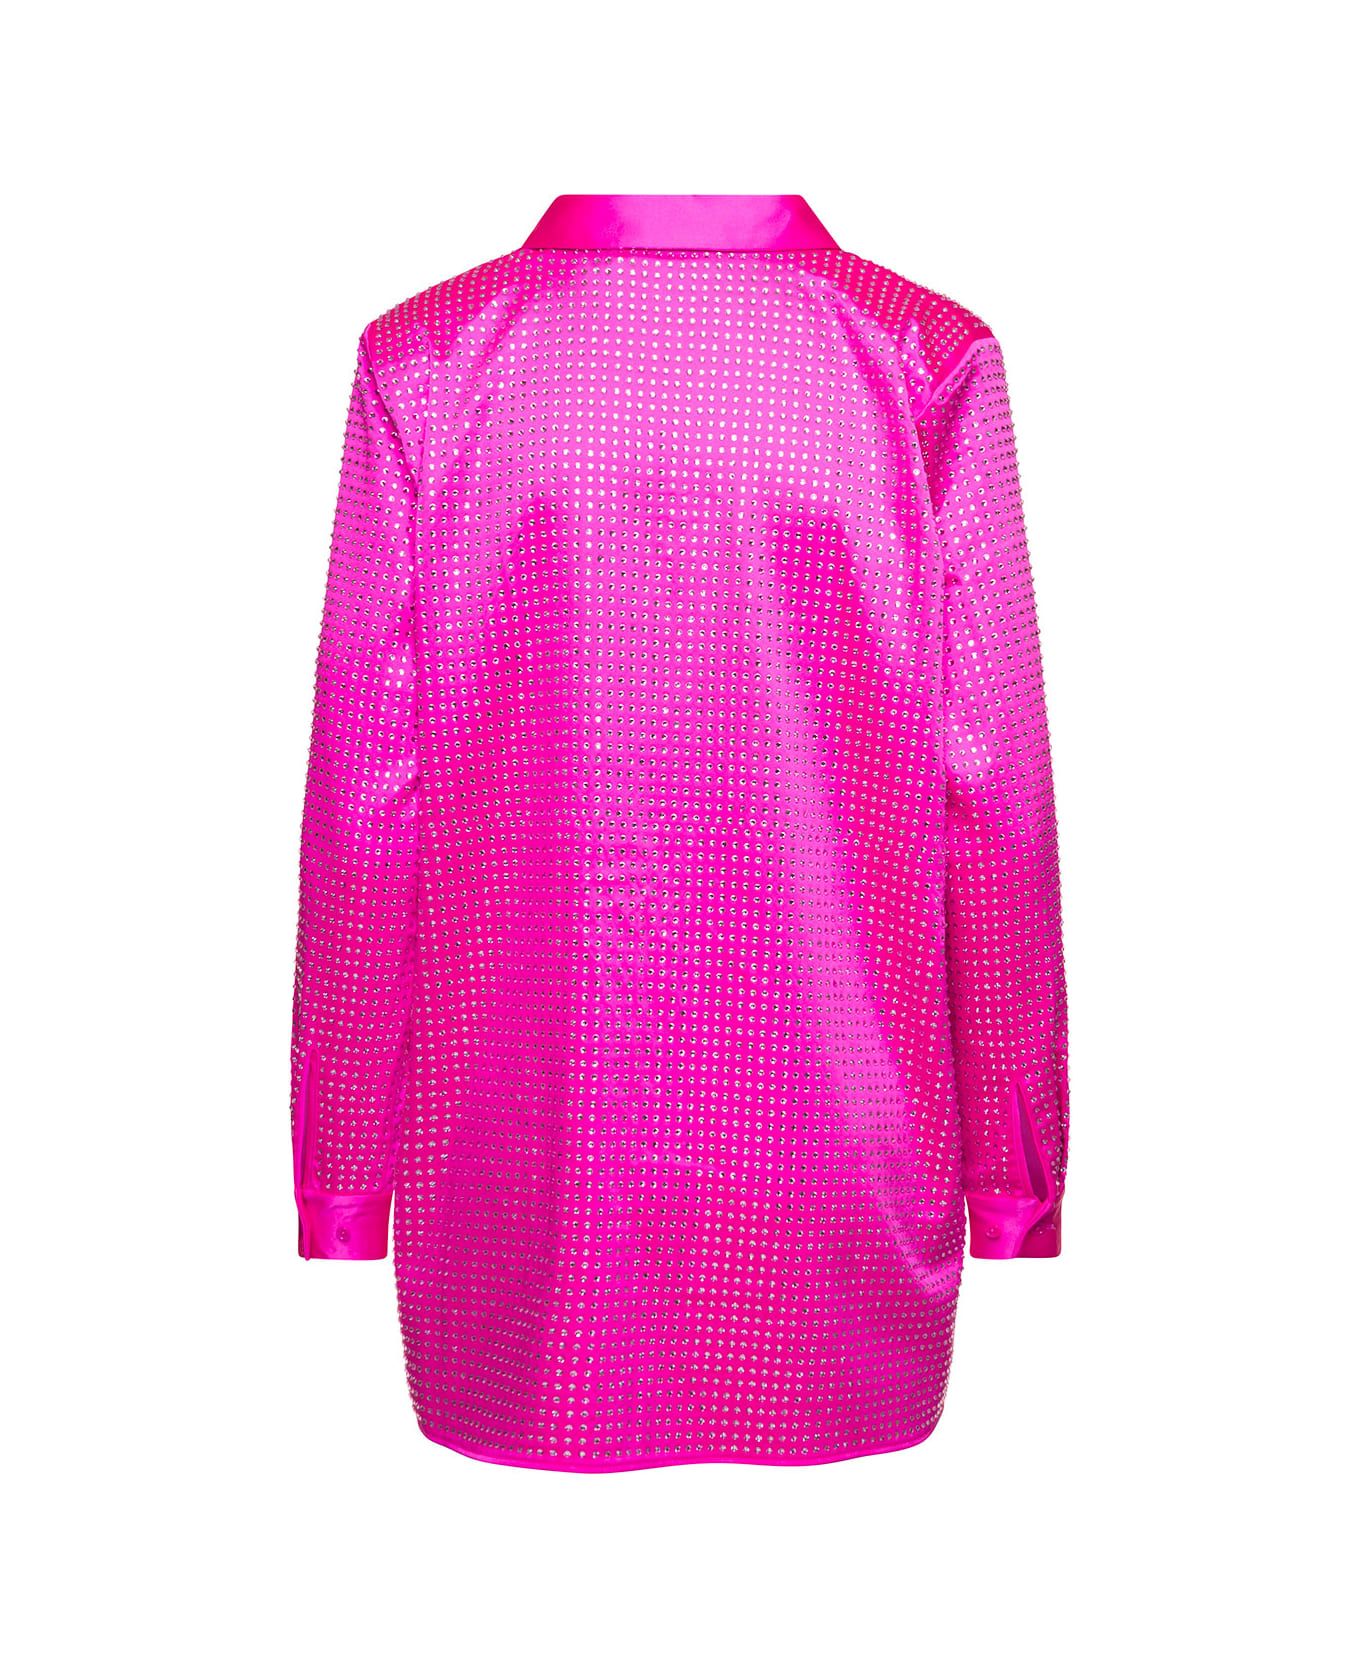 self-portrait Shirt With All-over Crystal Embellishment In Fuchsia Satin Woman - Fuxia